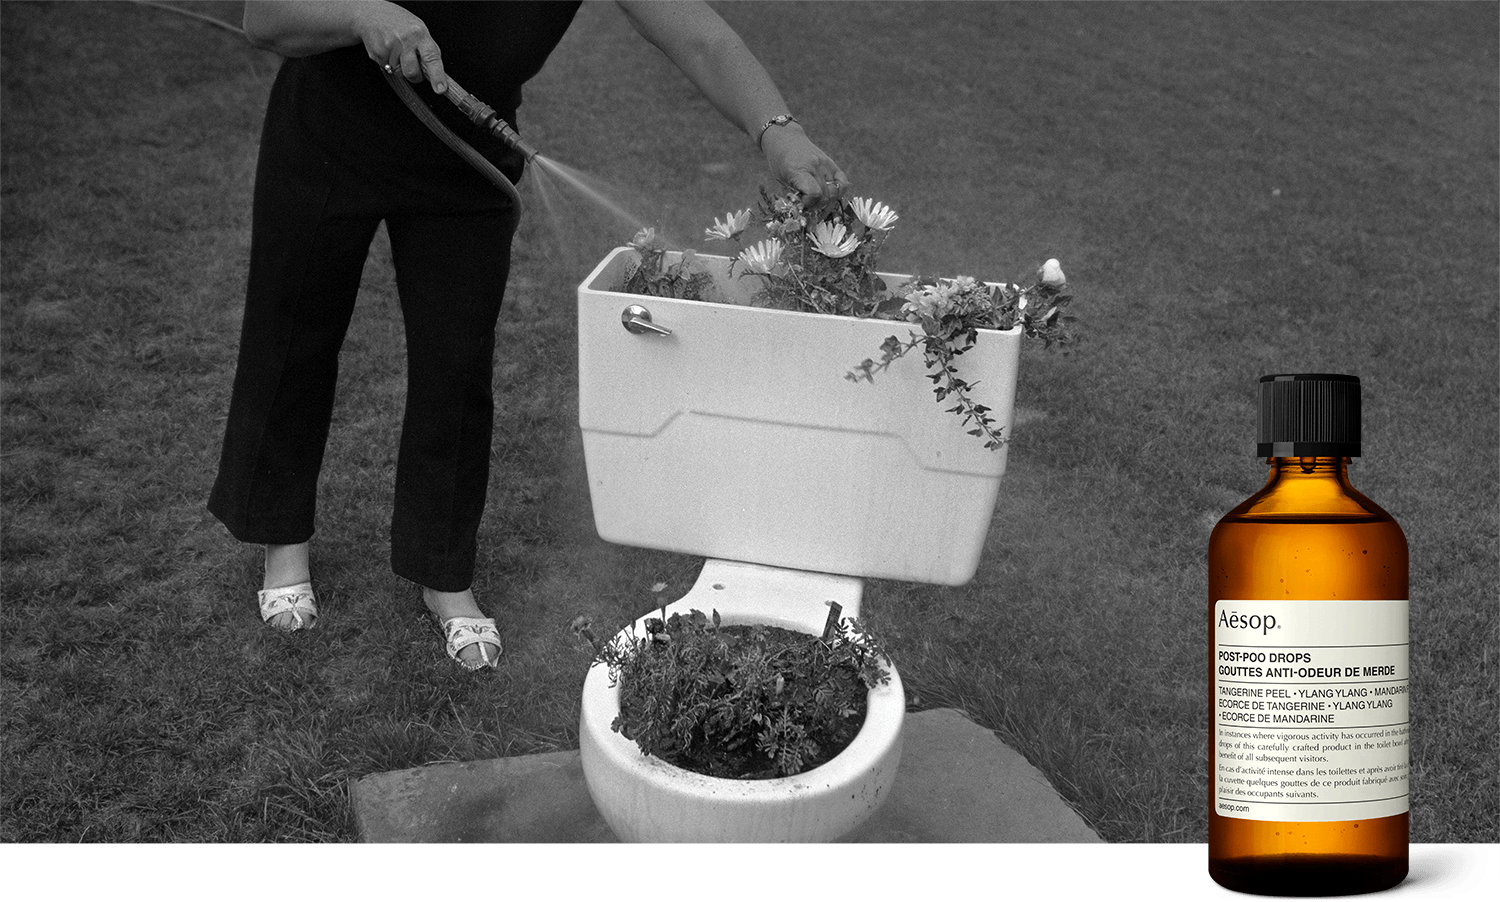 Retro black and white photograph depicting a woman outdoors using a hose to water flowers growing out of a toilet bowl.